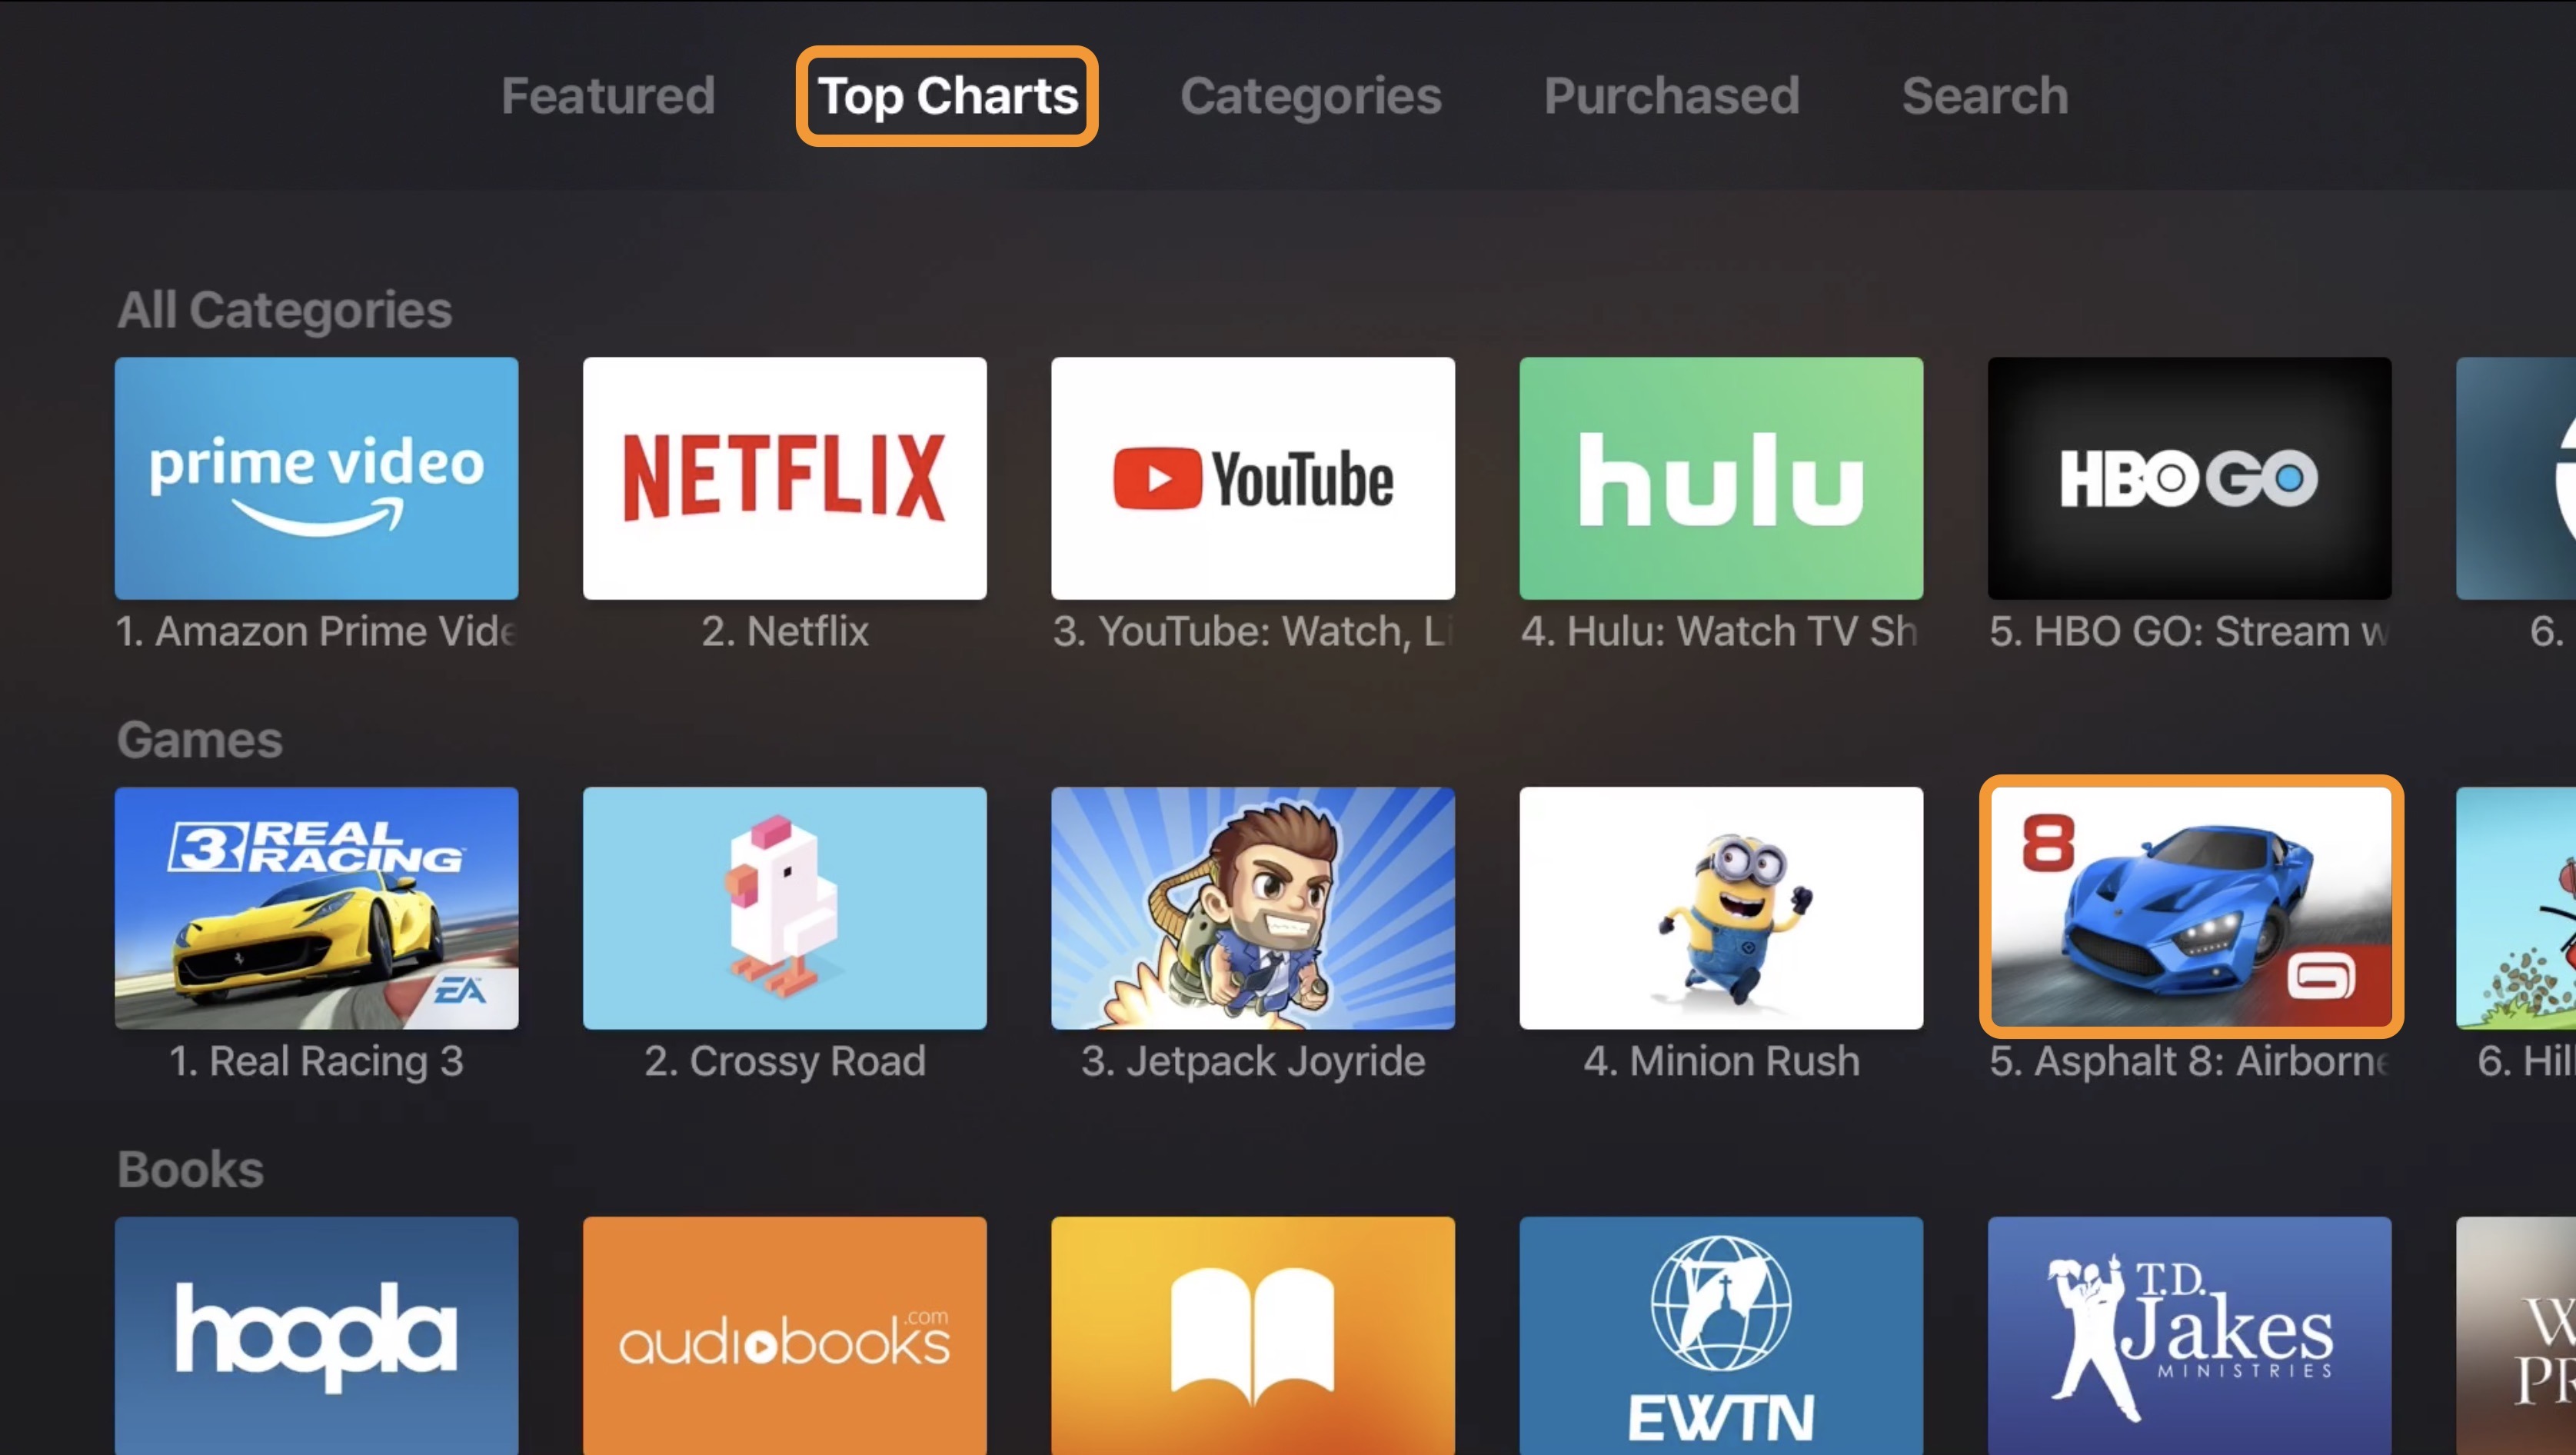 Can You Install Apps On The Apple TV?